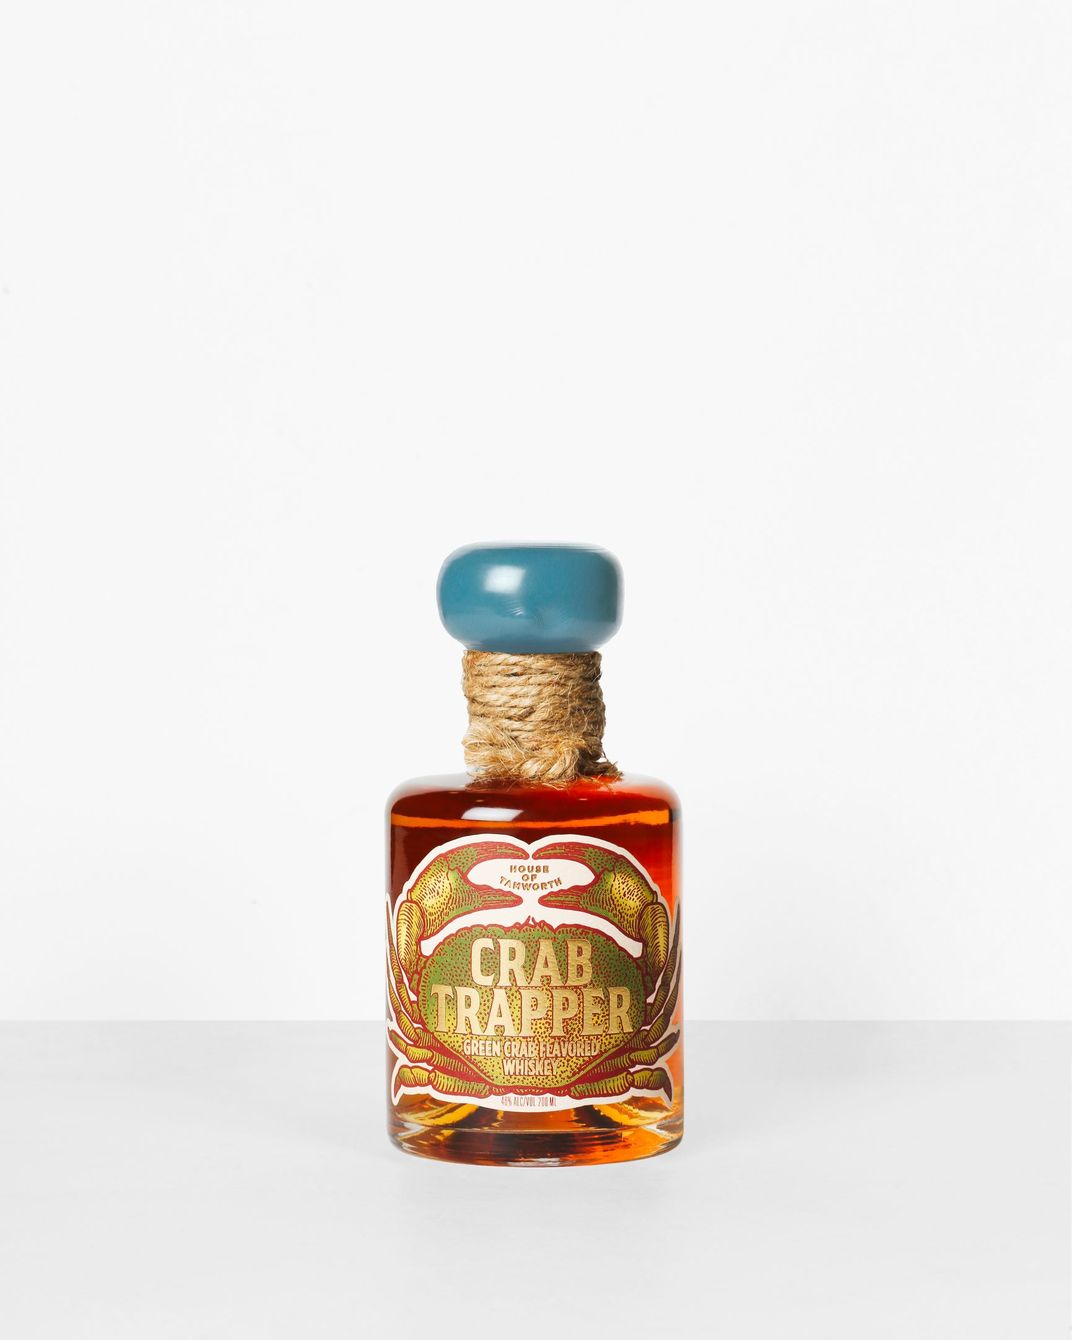 A small crab-trapper whisky bottle